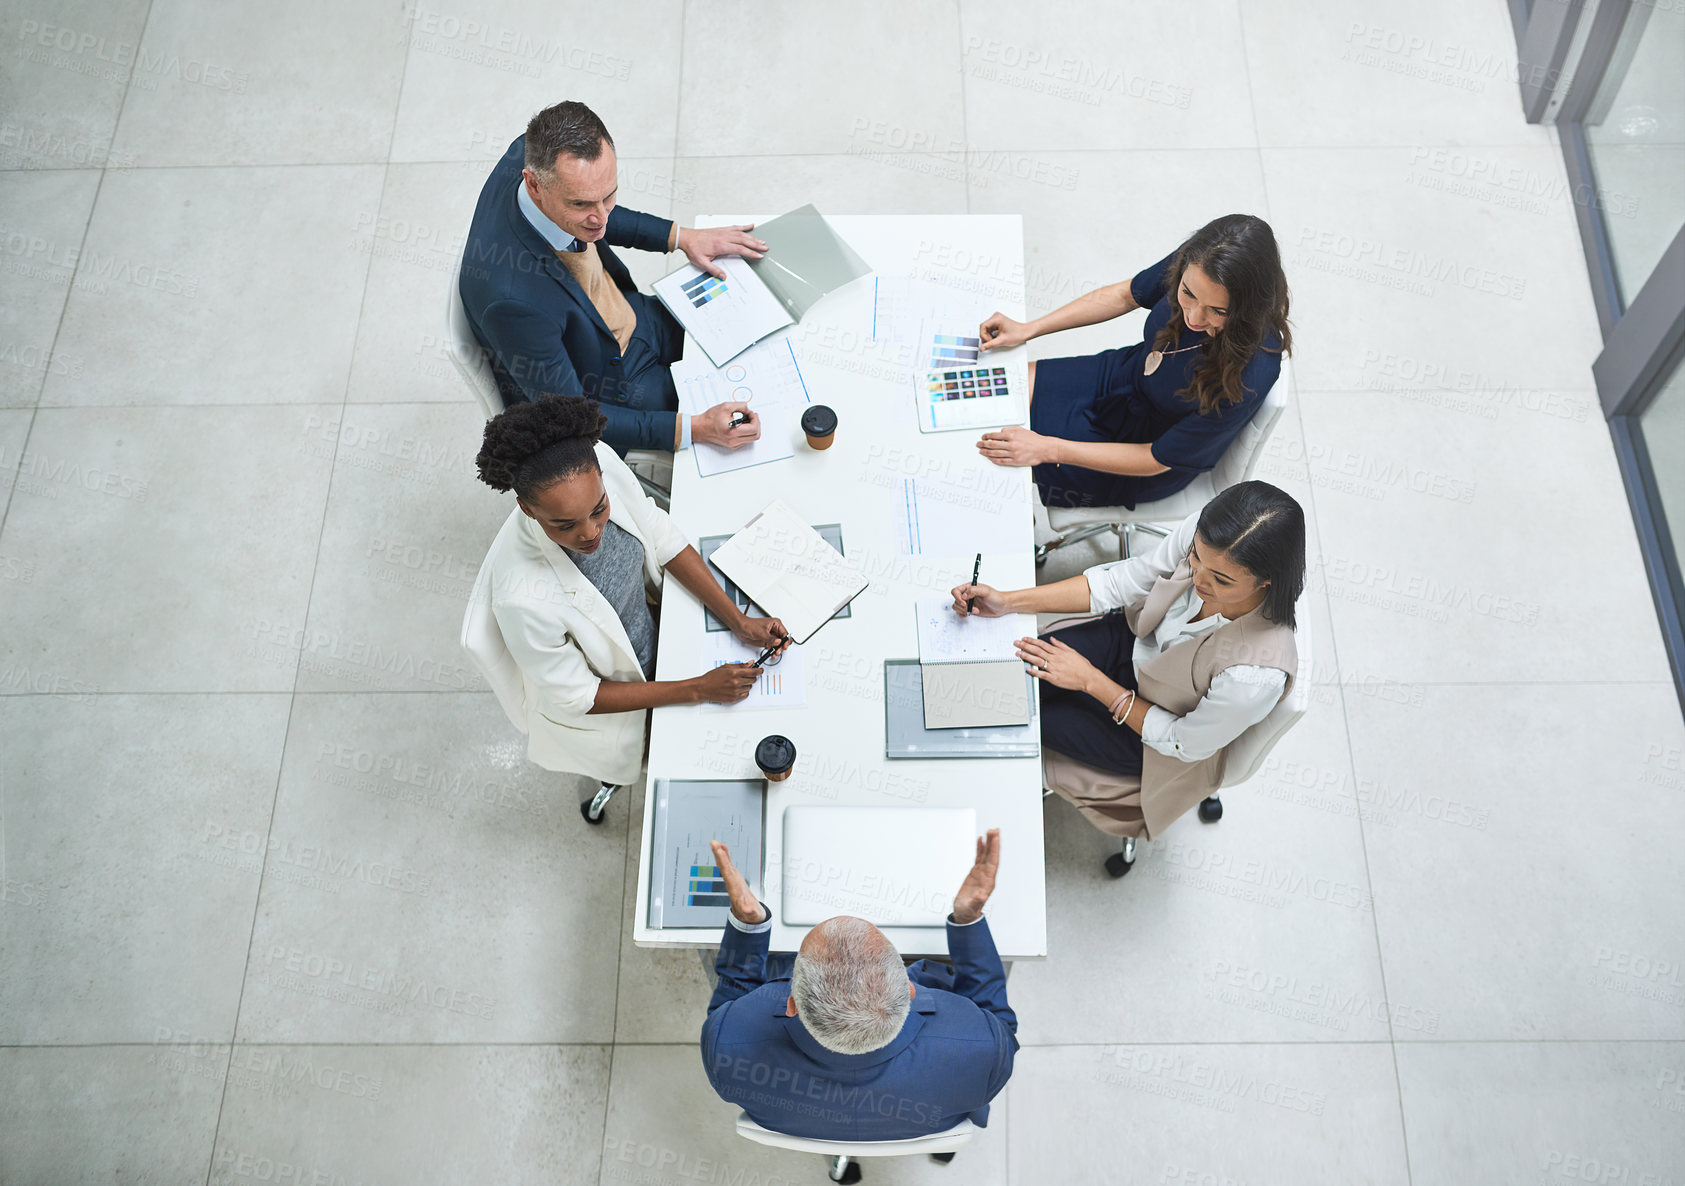 Buy stock photo High angle shot of businesspeople having a meeting in a modern office